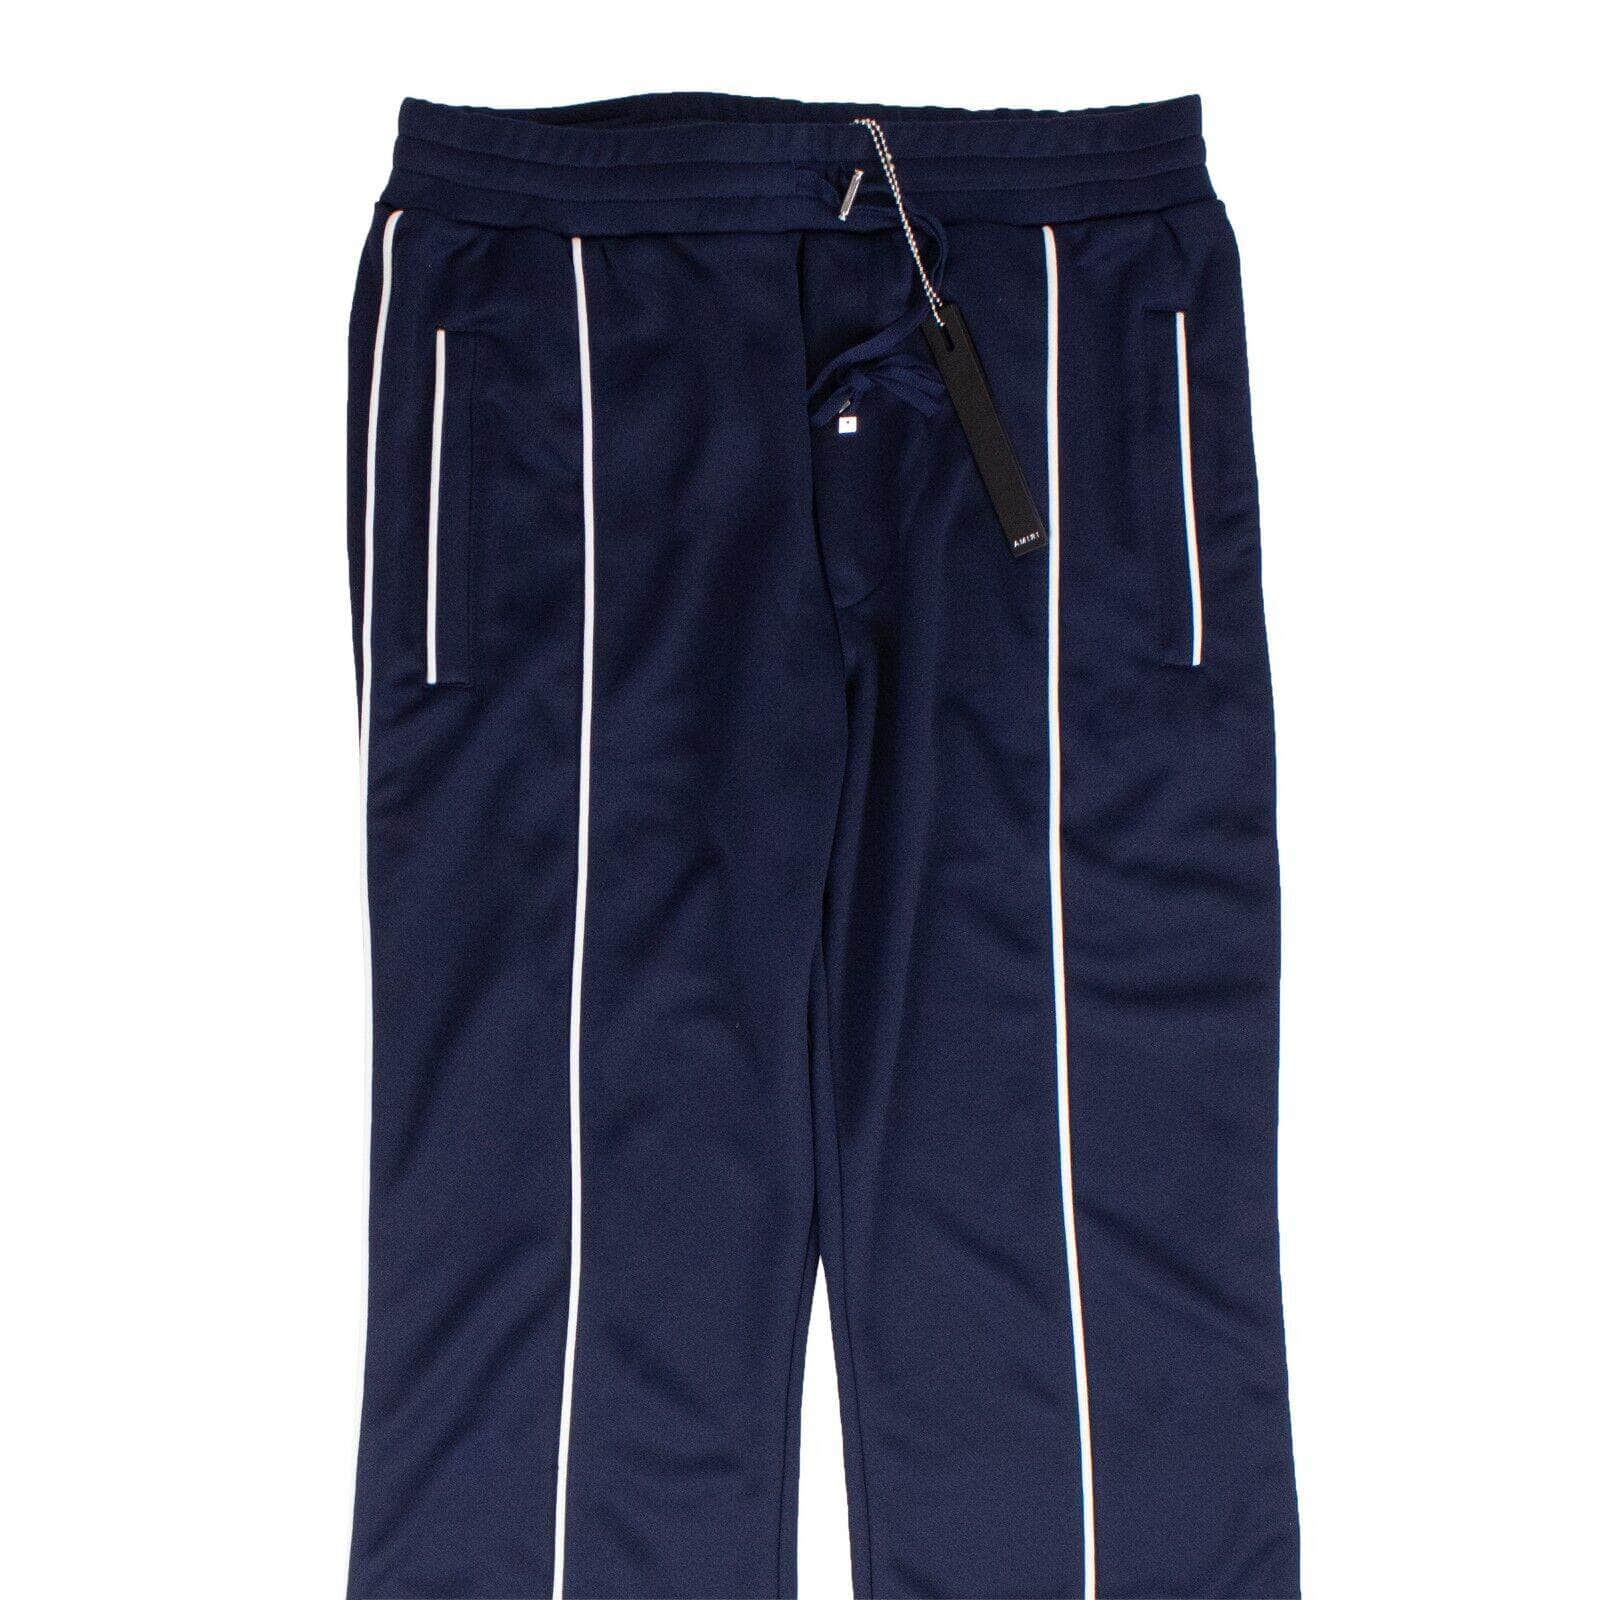 Amiri 500-750, amiri, channelenable-all, chicmi, couponcollection, gender-mens, main-clothing, mens-shoes, mens-track-pants, size-l L Navy Sheen Track Pants AMR-XBTM-0090/L AMR-XBTM-0090/L